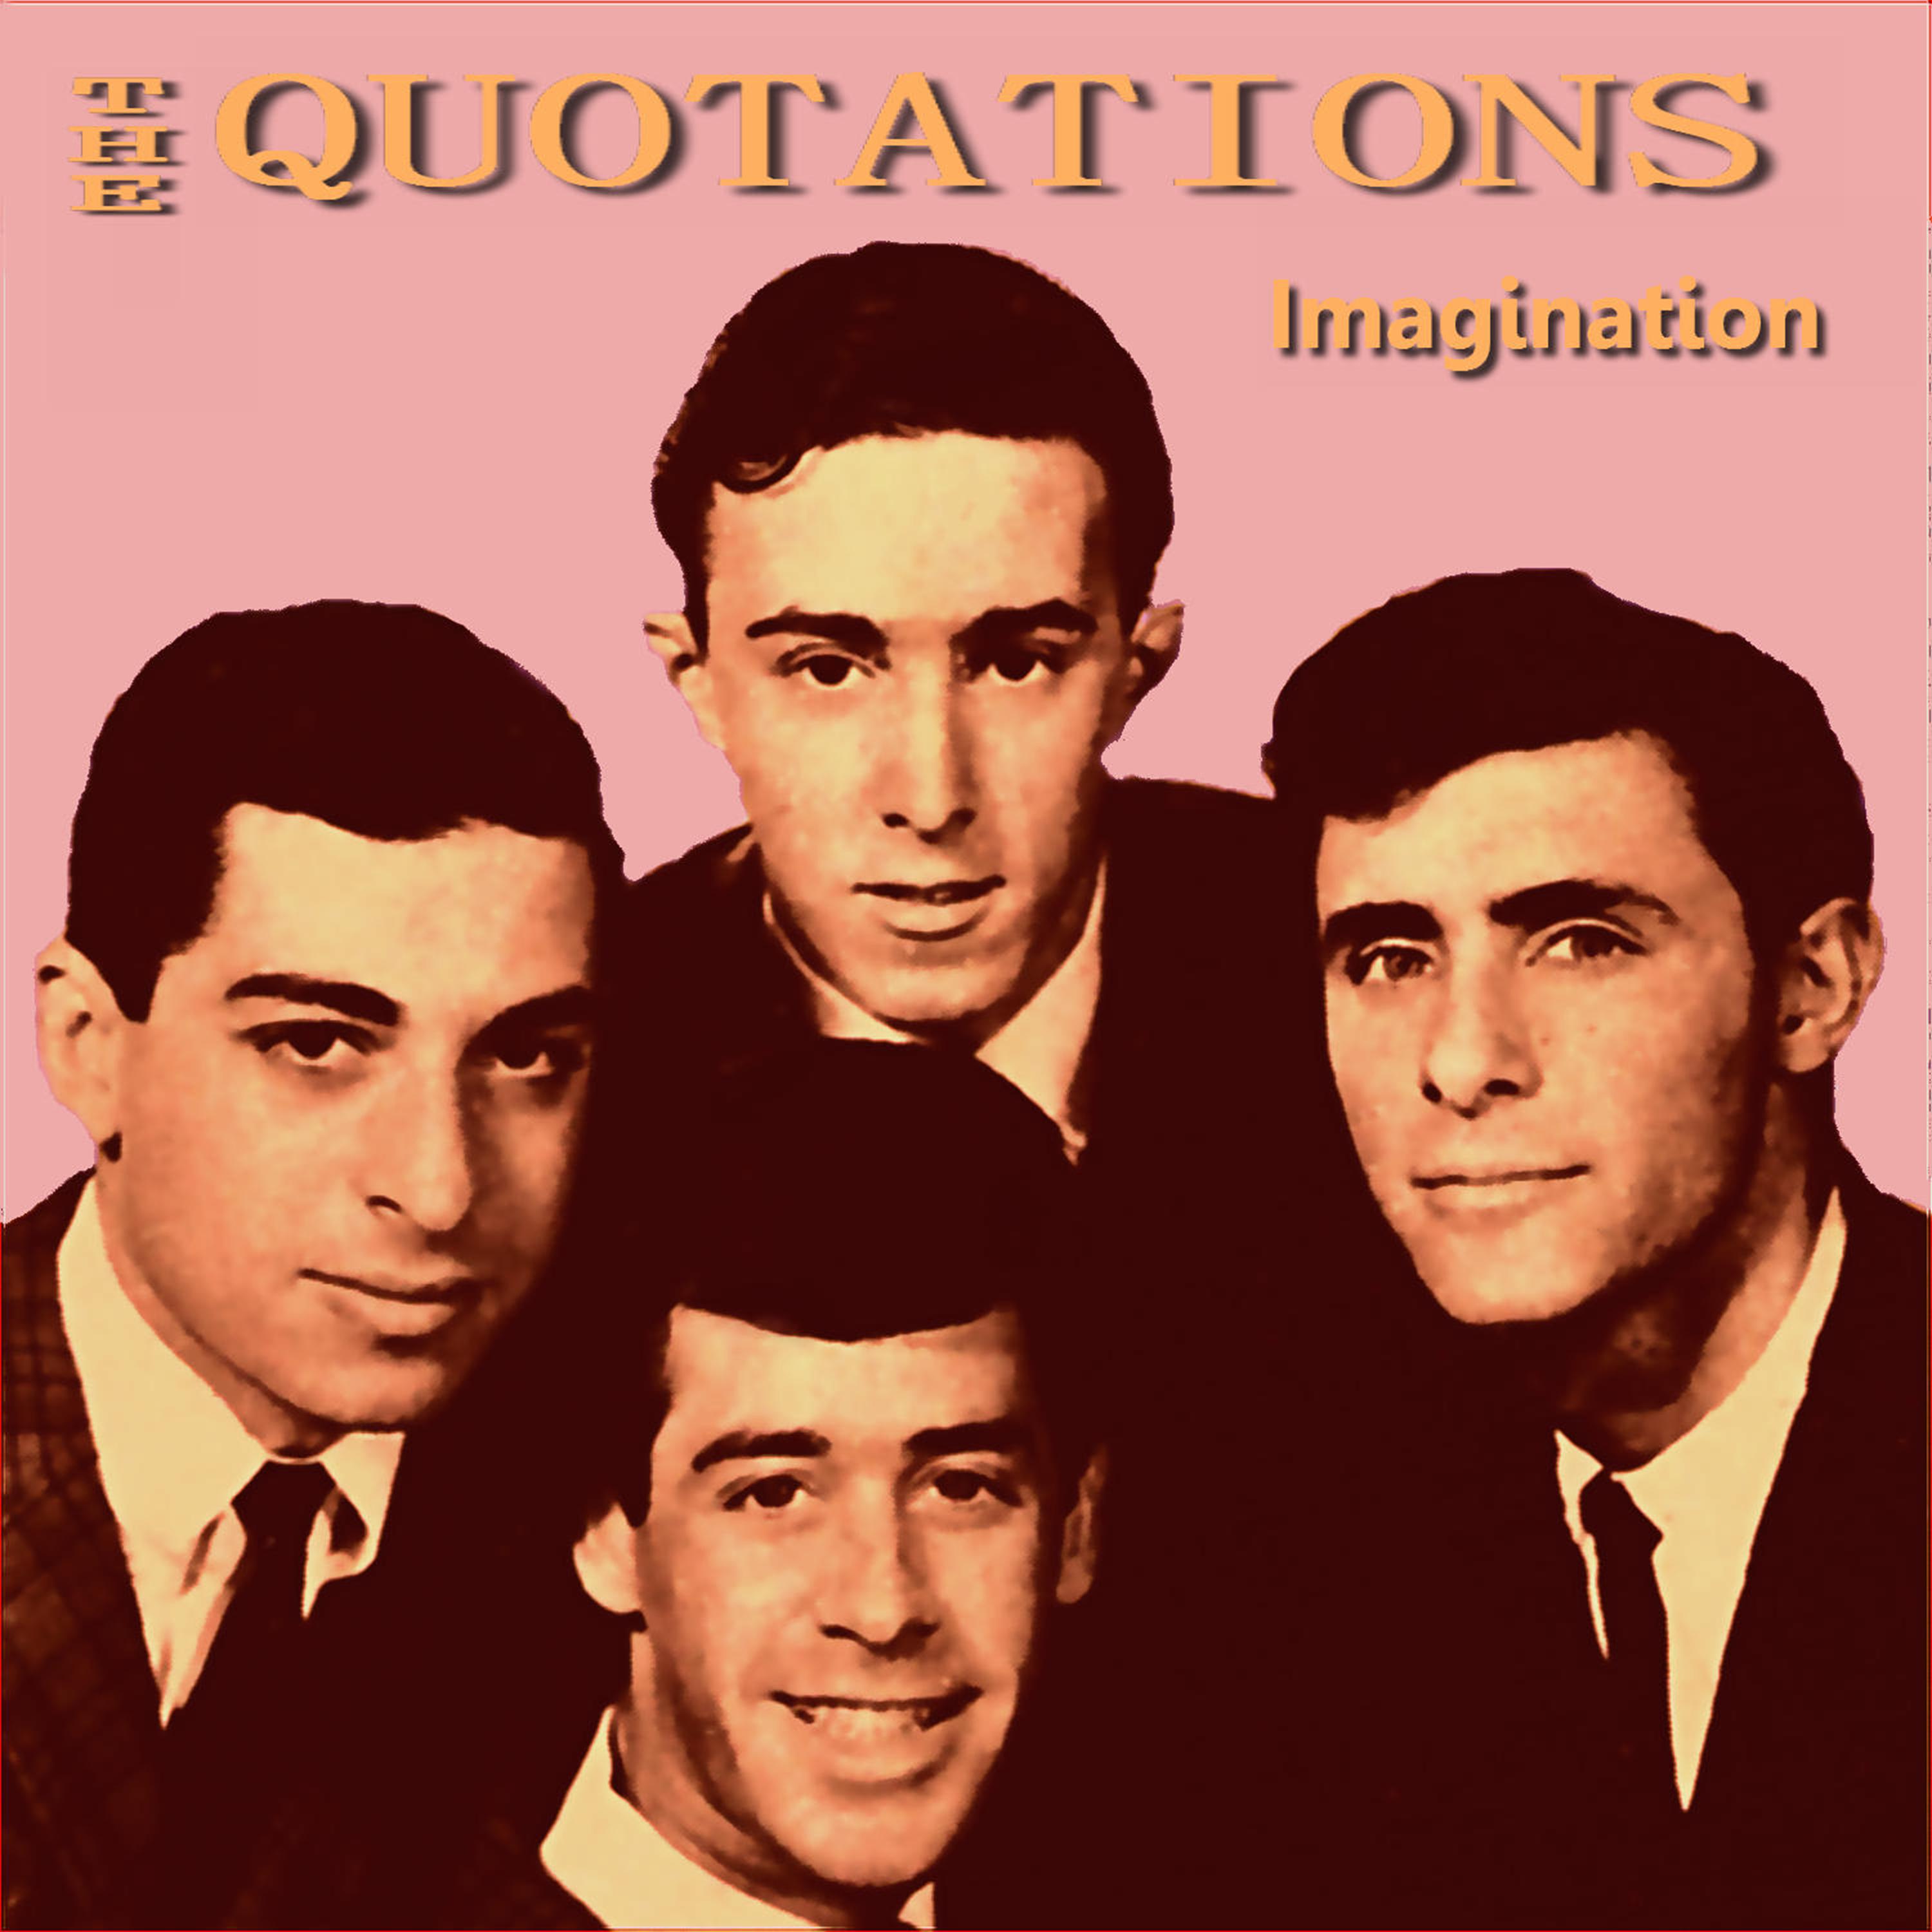 The Quotations - Is It True What They Say About Barbara?